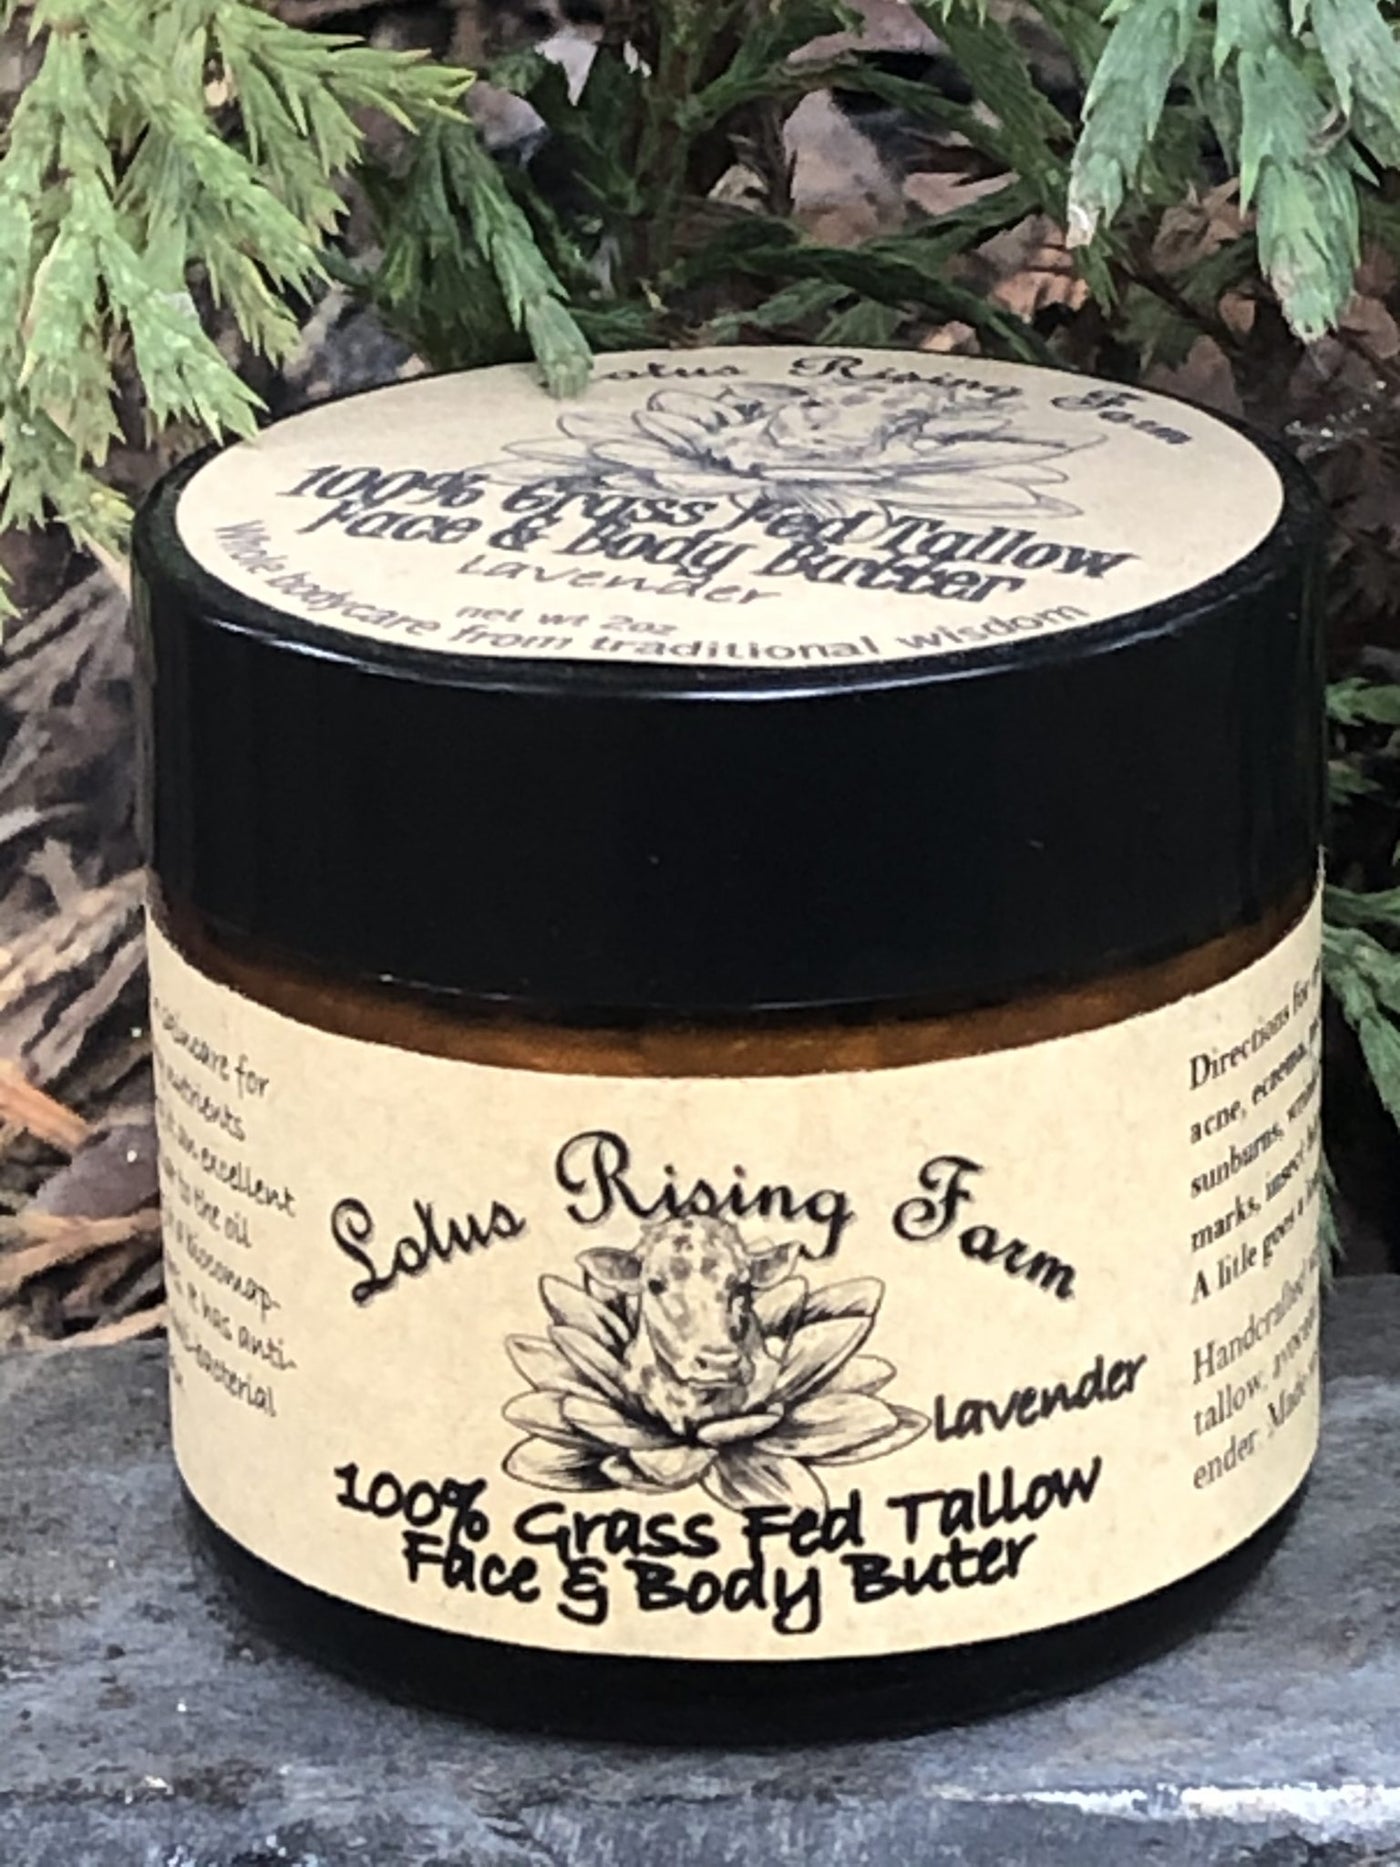 Lotus Rising Farm - Face and Body Butter